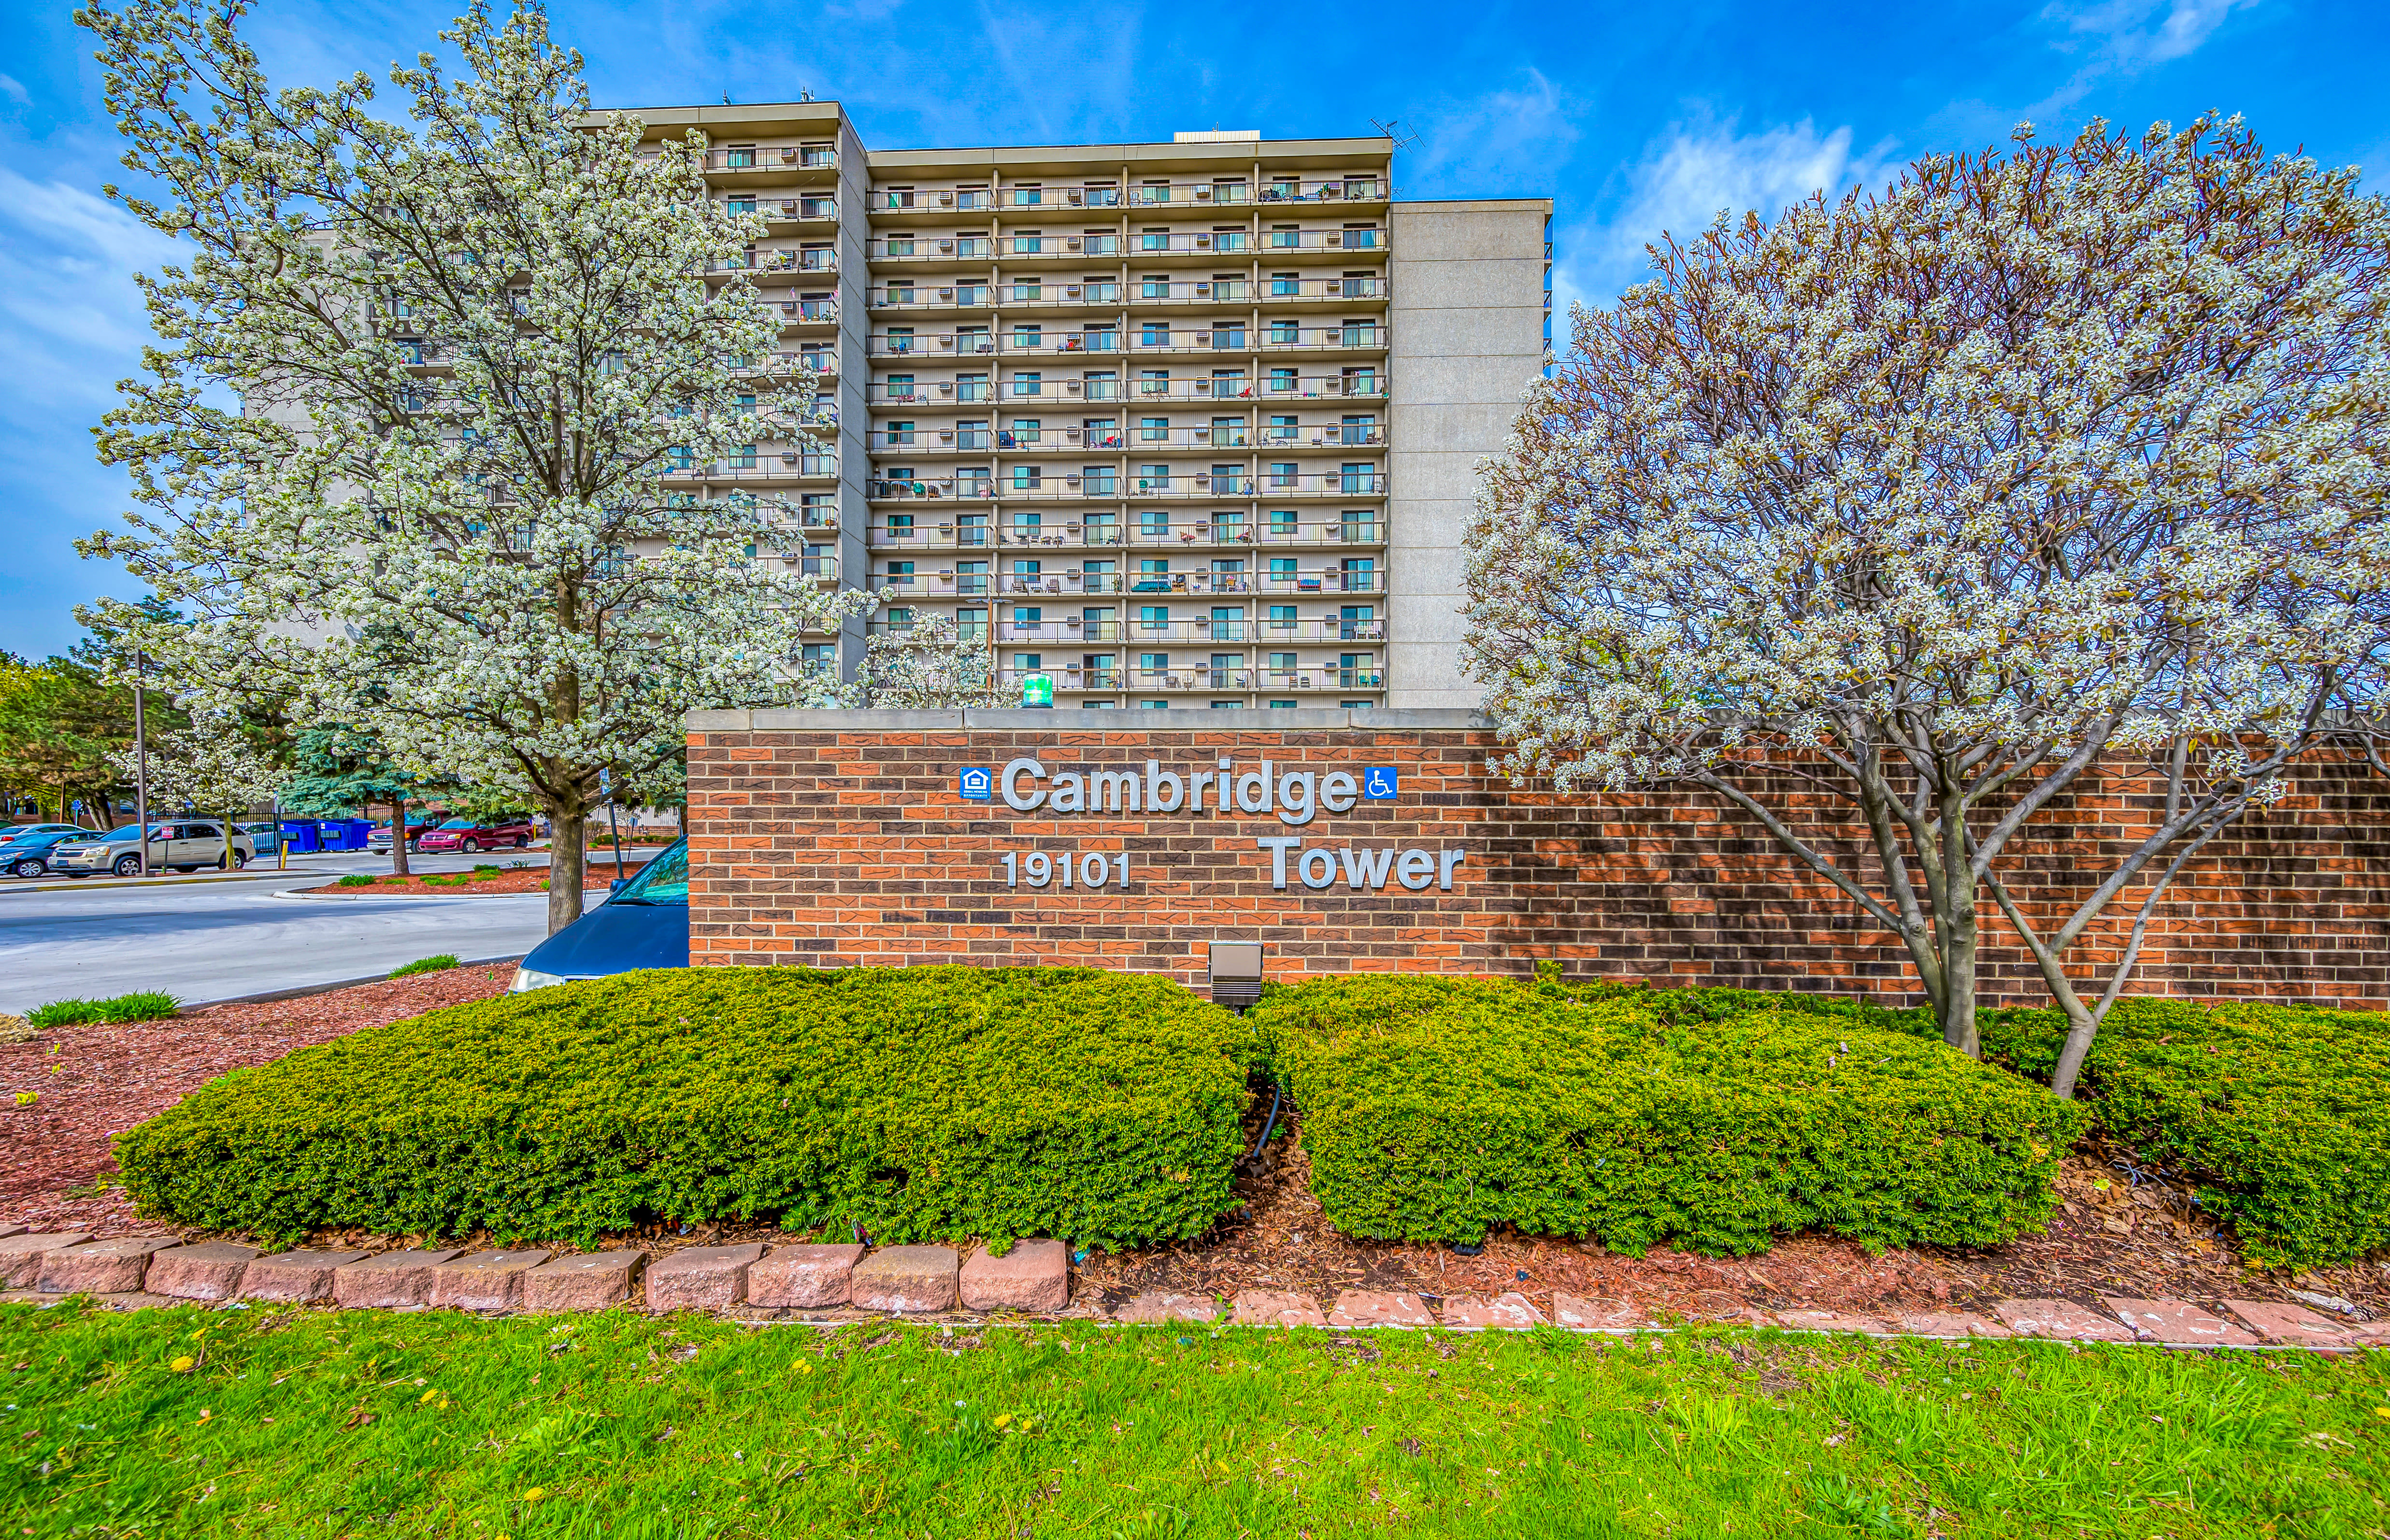 Exterior grounds and sidewalk with mountains in the distance at Cambridge Towers in Detroit, Michigan